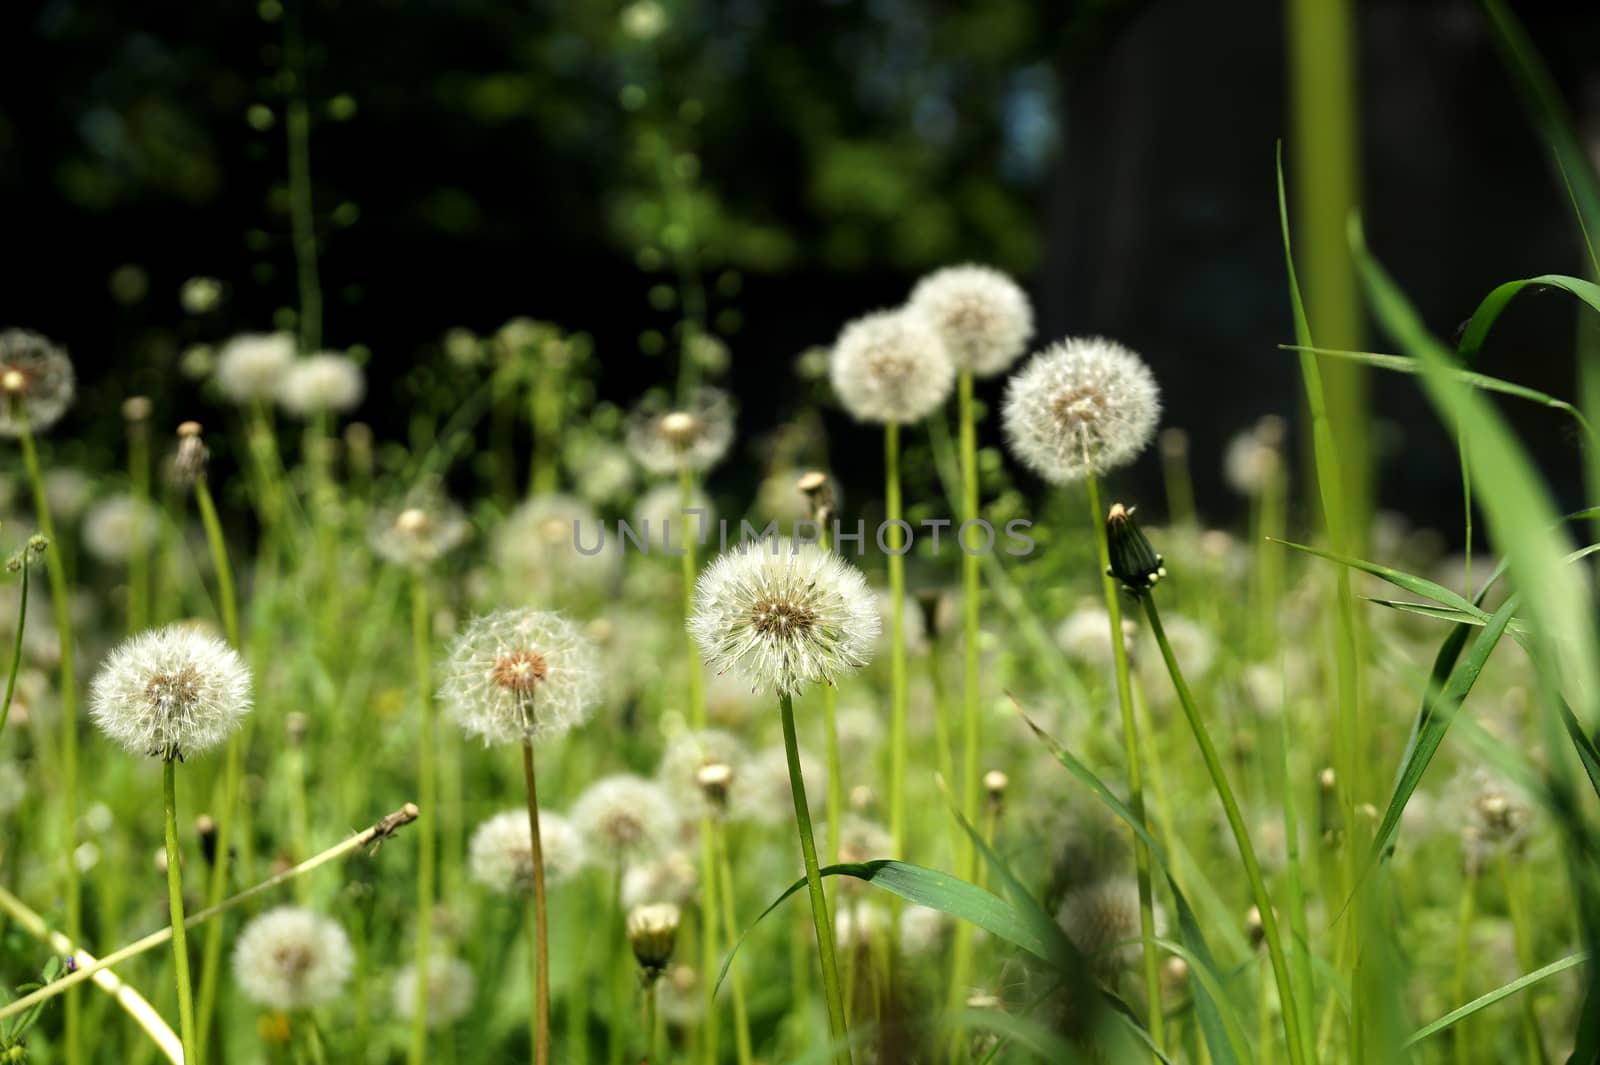 Mature dandelions on a lawn in the city yard in May